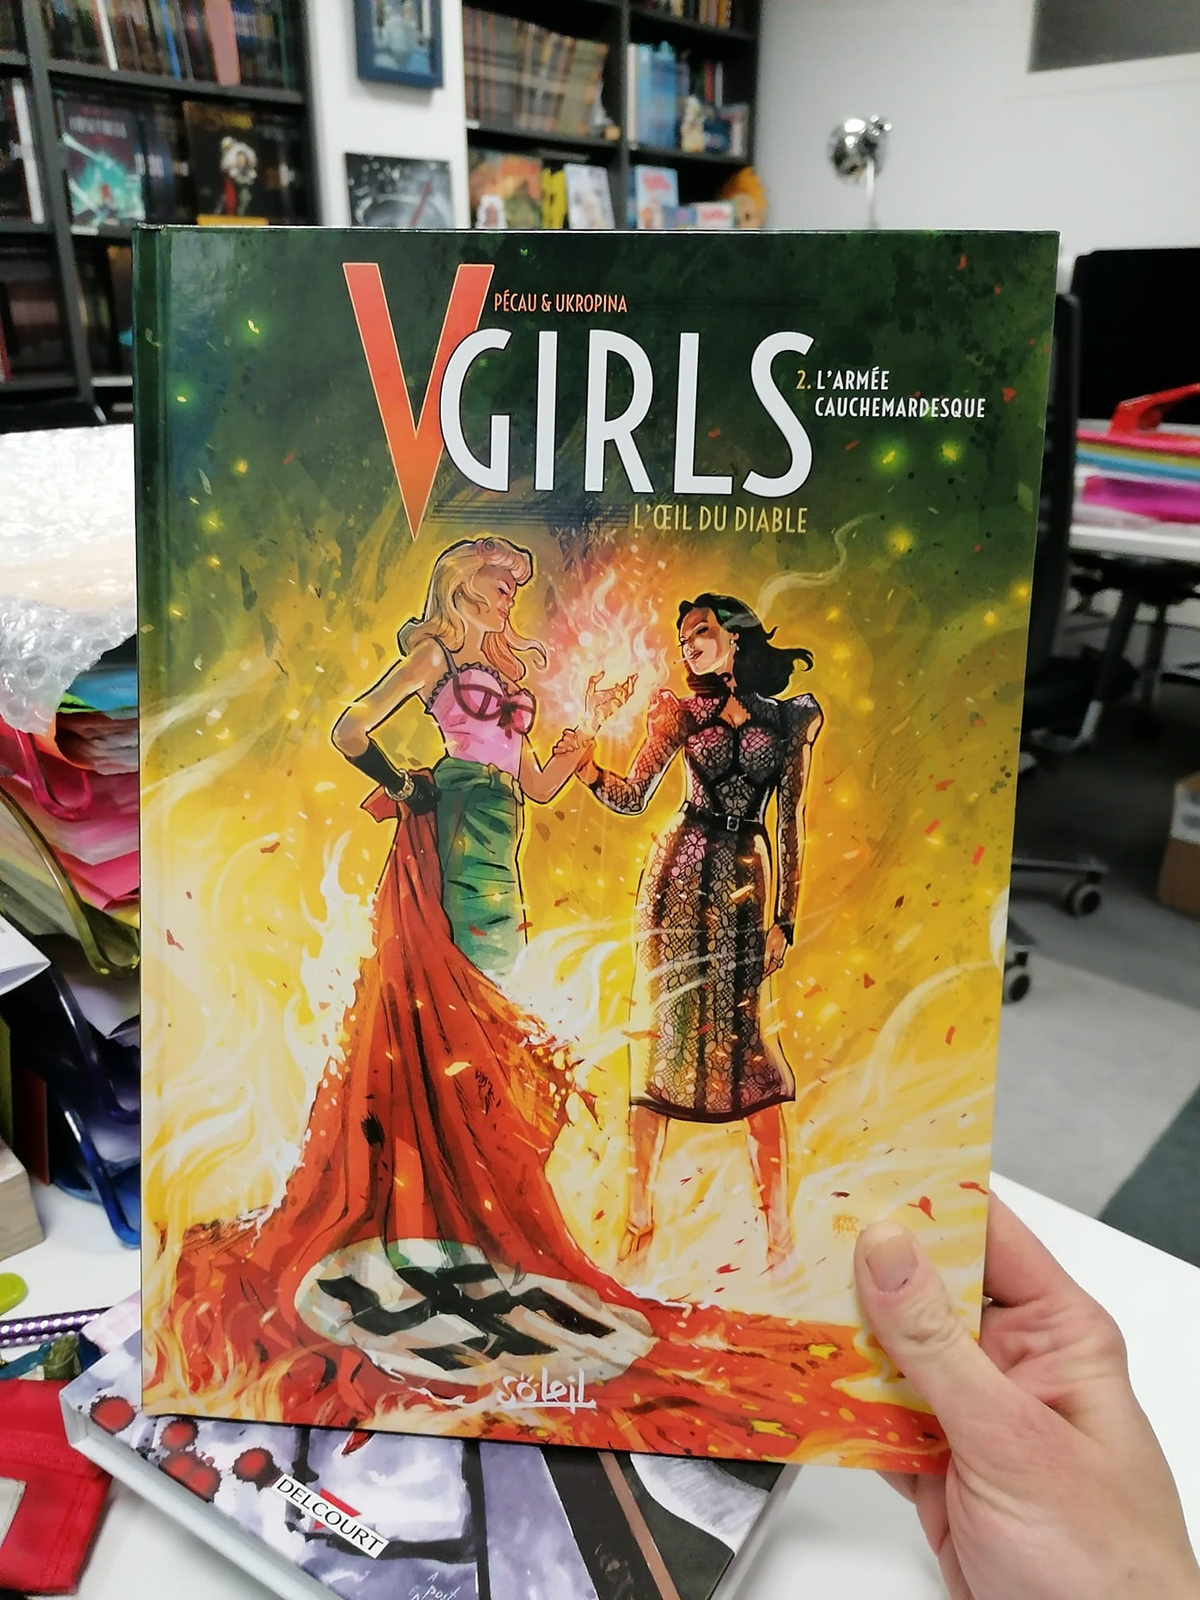 Preview of V GIRLS 2! My comic book (bande dessinée) project! 
